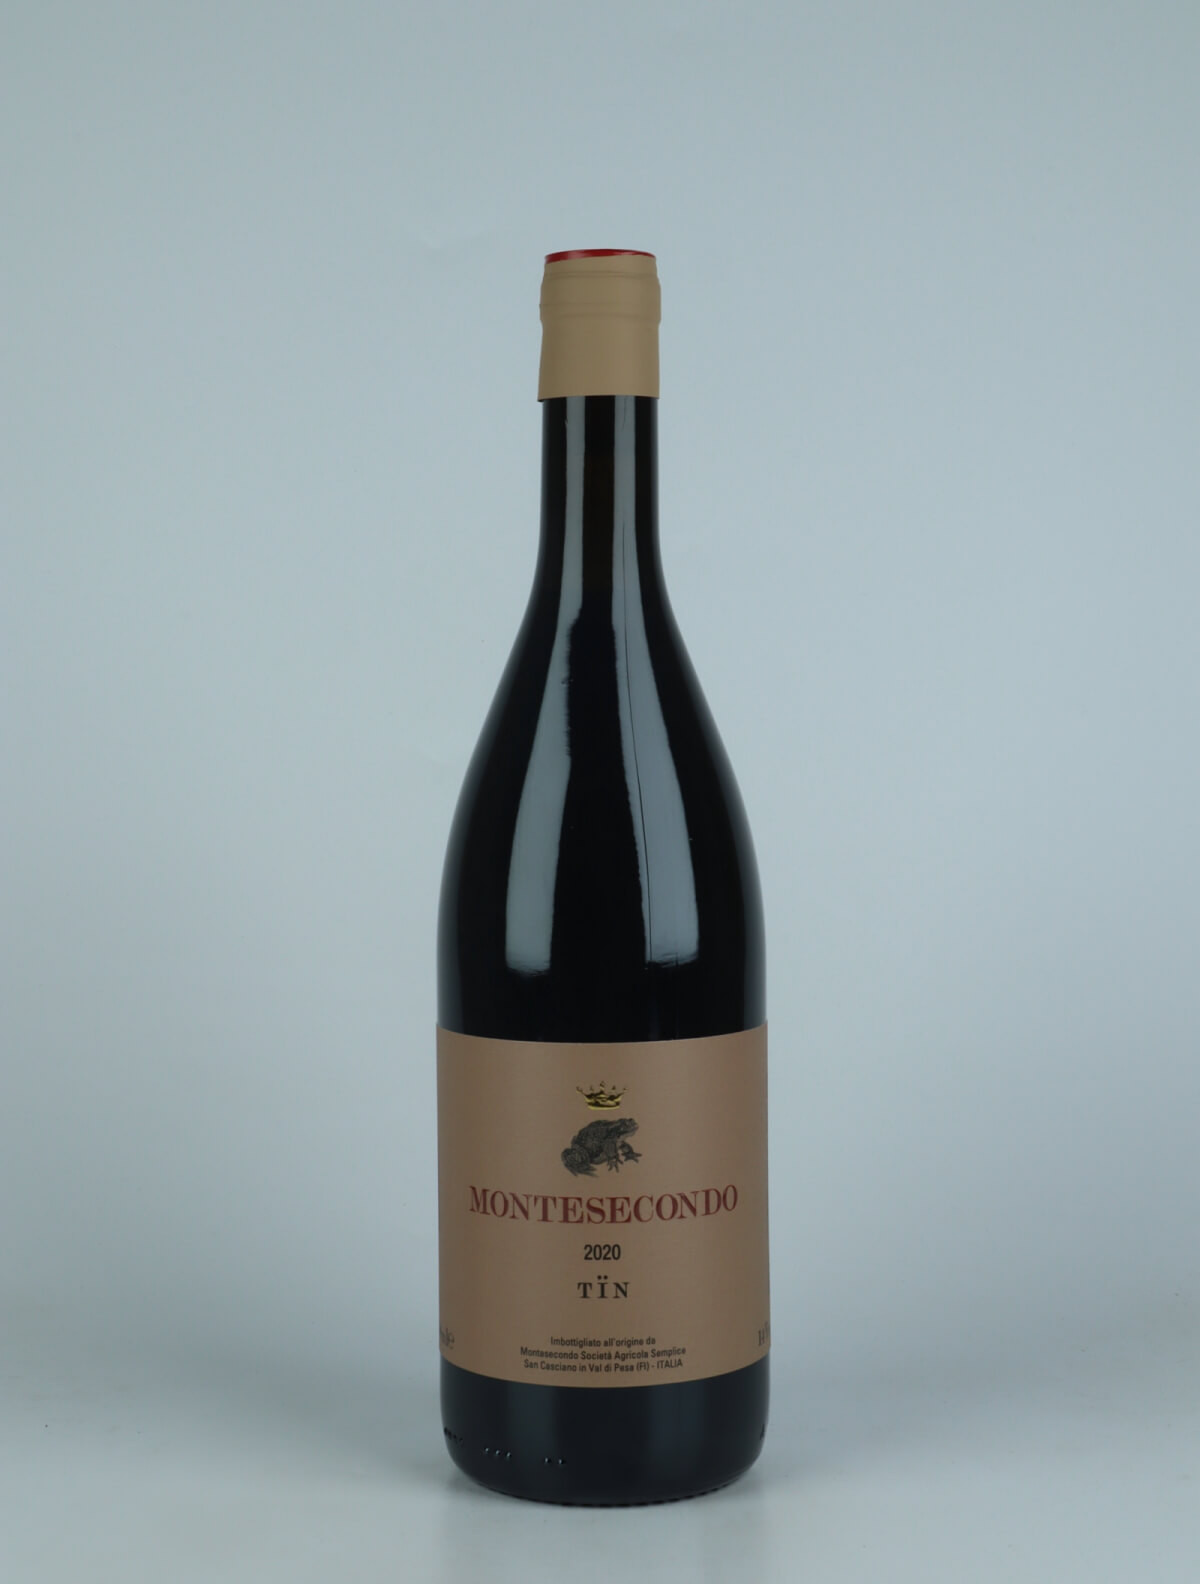 A bottle 2020 Tïn - Sangiovese Red wine from Montesecondo, Tuscany in Italy